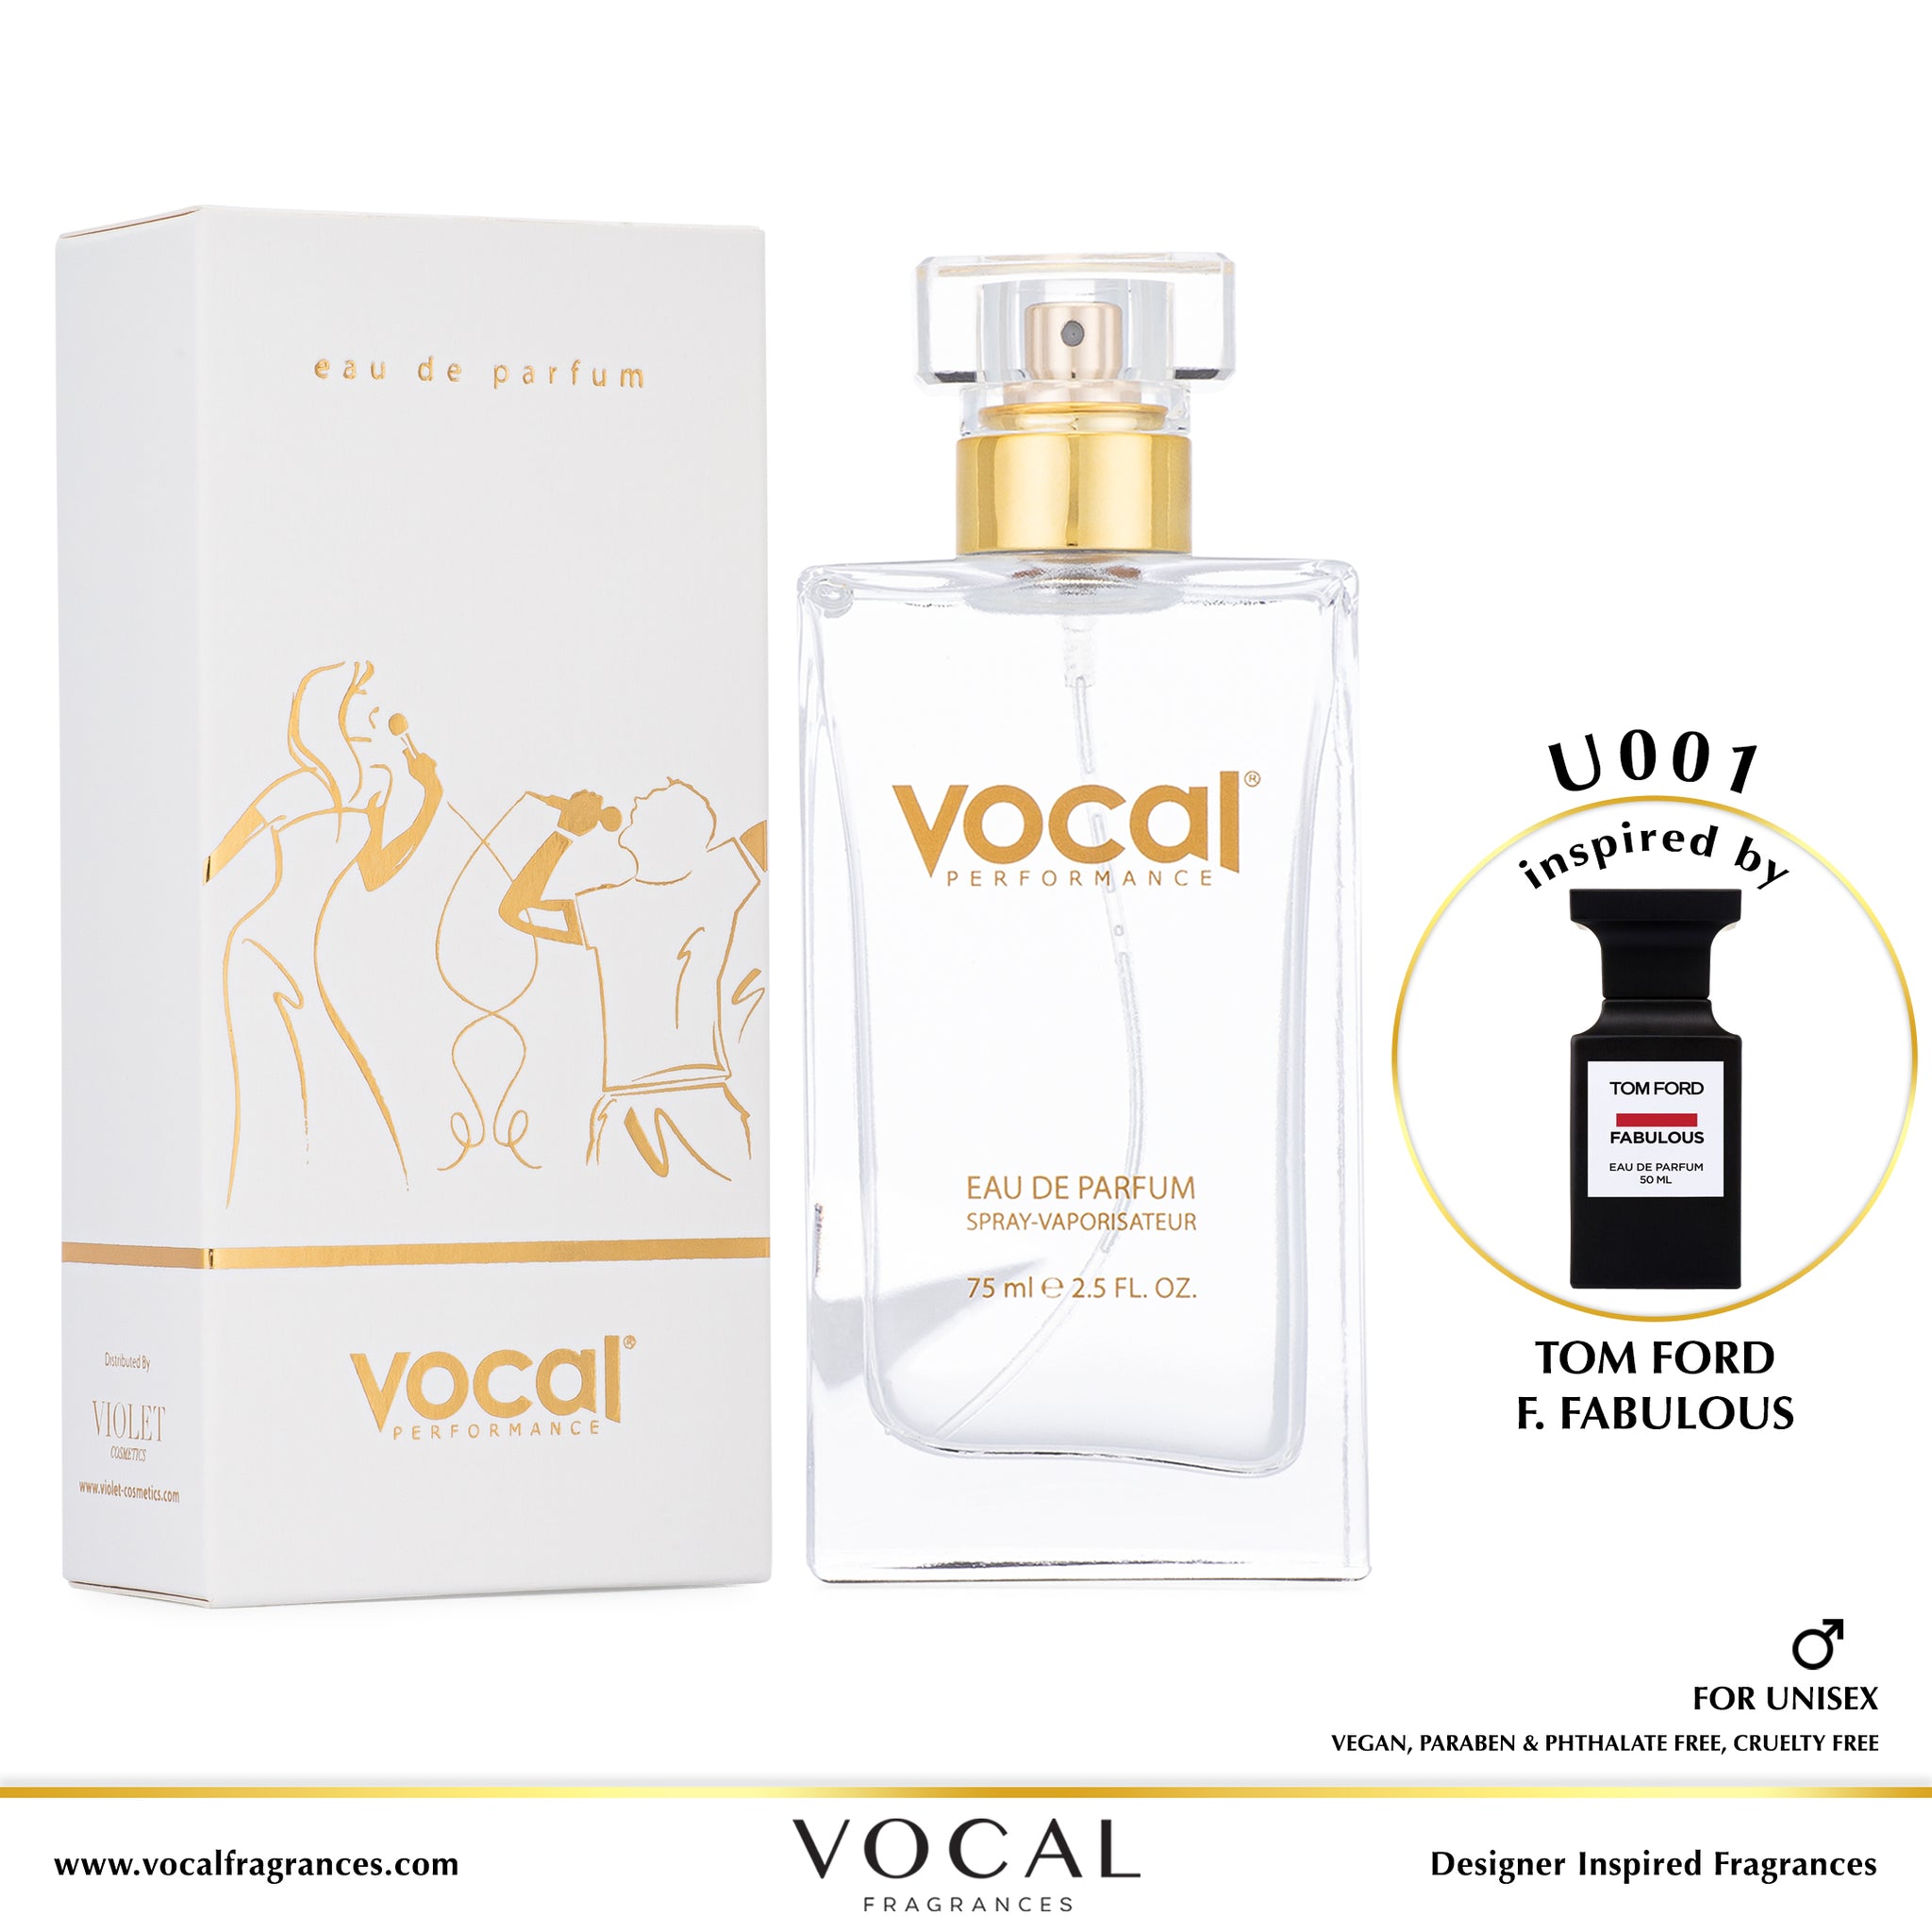 U001 Vocal Performance Eau De Parfum For Unisex Inspired by Tom Ford F. Fabulous